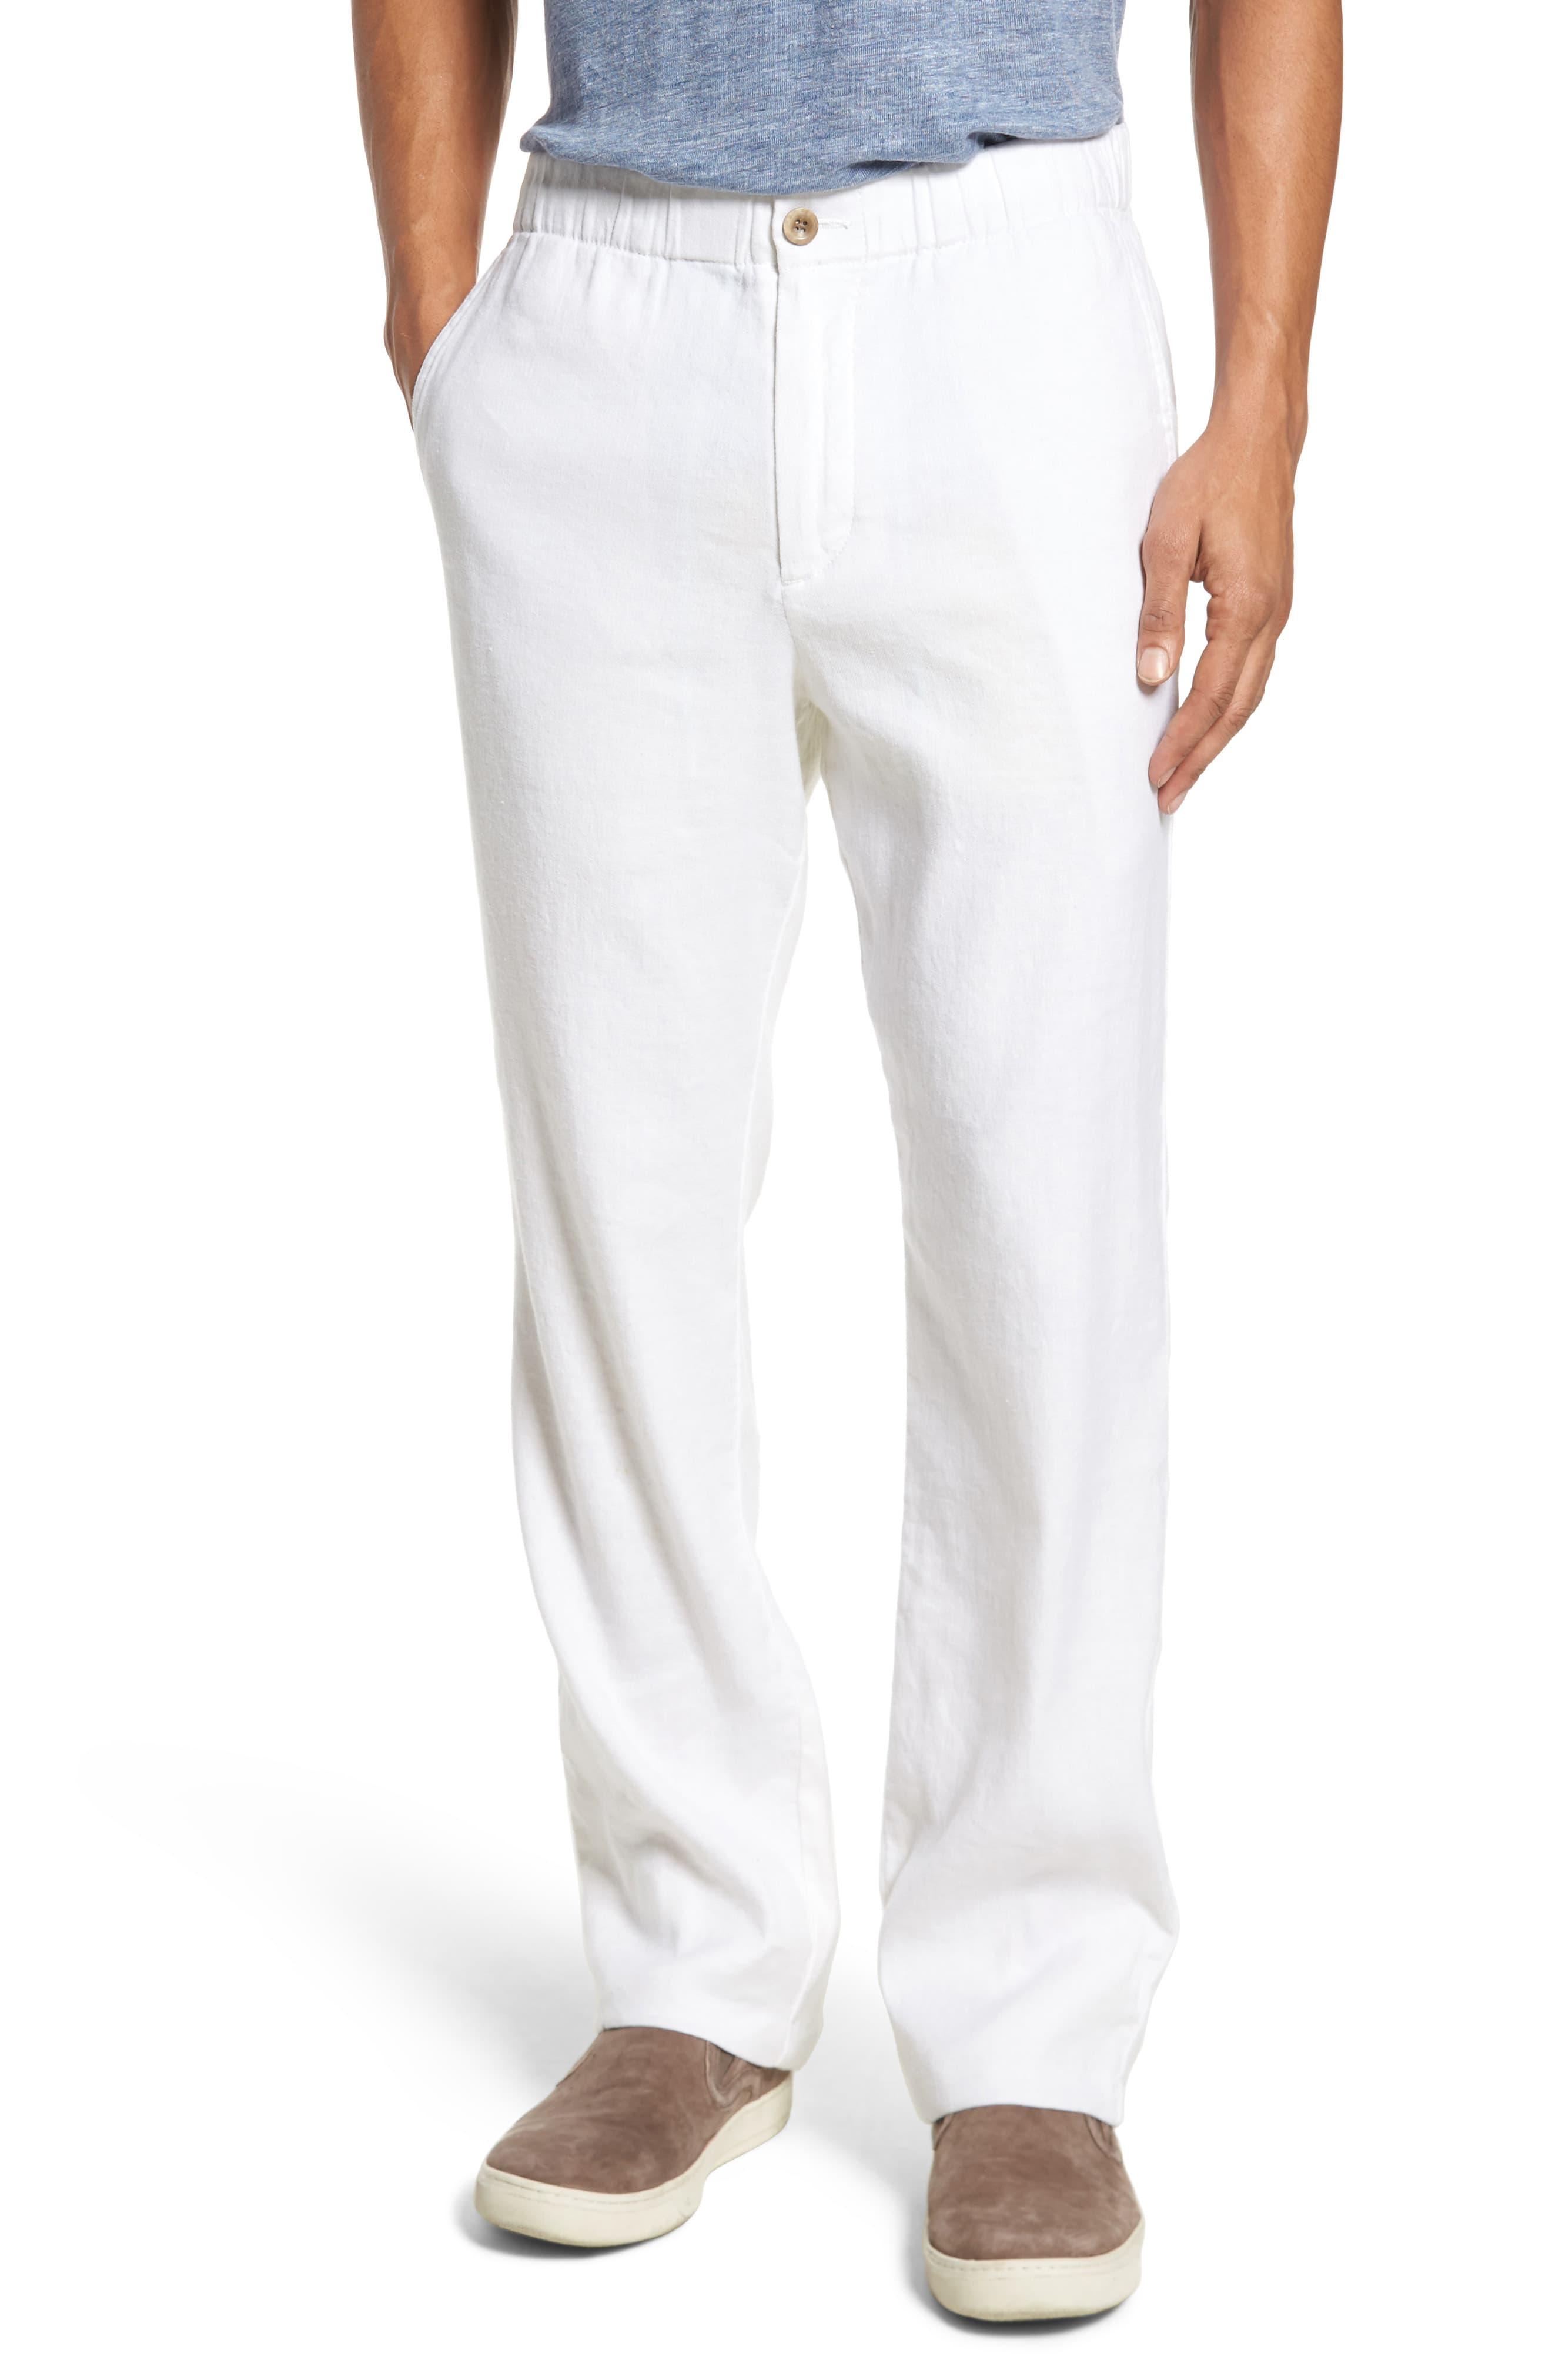 Tommy Bahama Relaxed Fit Linen Pants in White for Men - Lyst